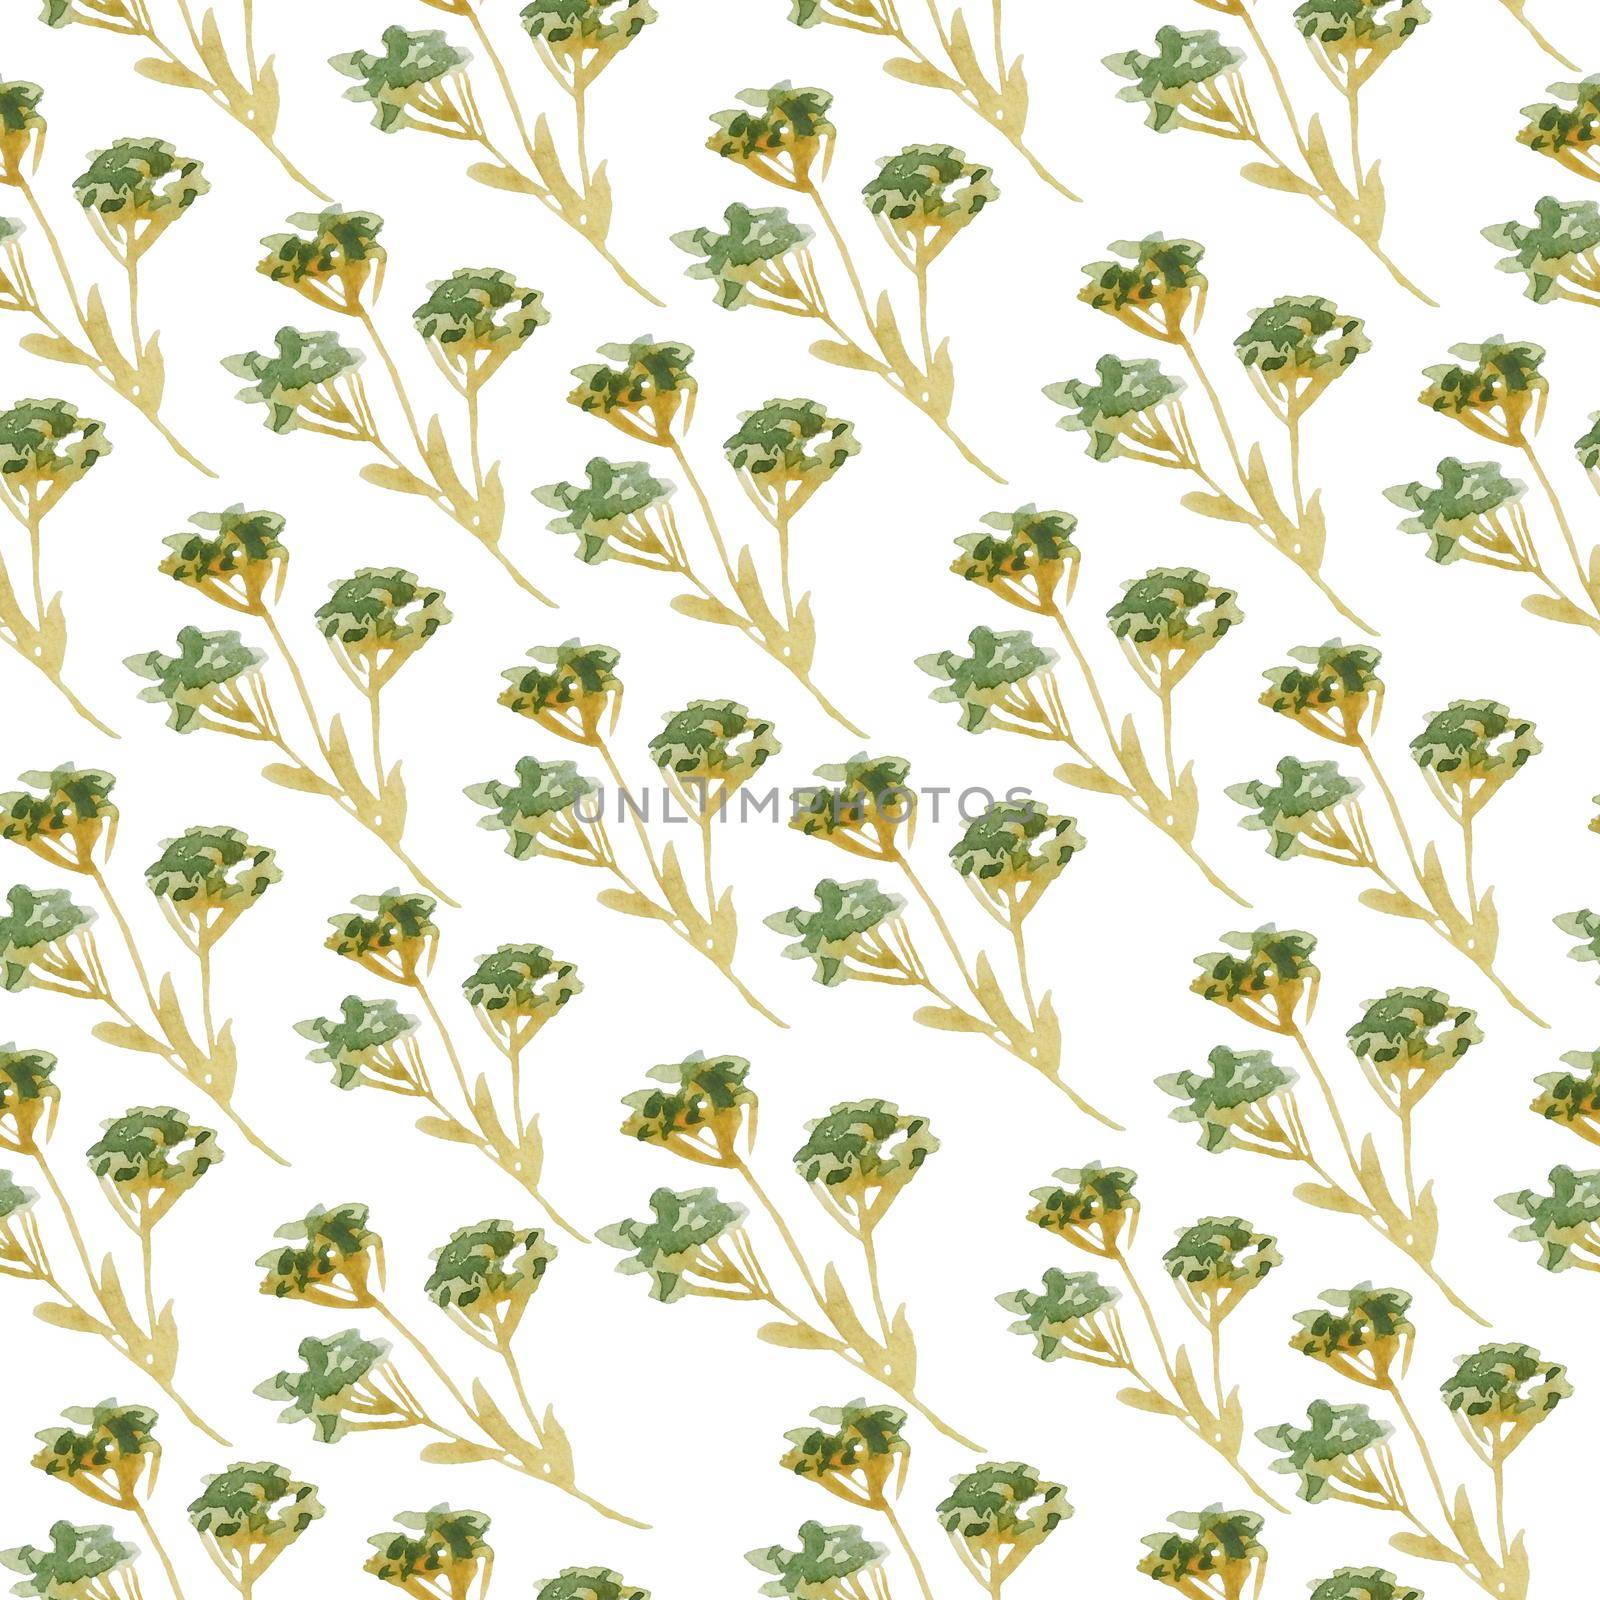 Seamless hand drawn watercolor pattern with green yellow wild herbs leaves grass in wood woodland forest. Organic natural plants, floral botanical design for wallpapers textile wrapping paper. Fall autumn. by Lagmar